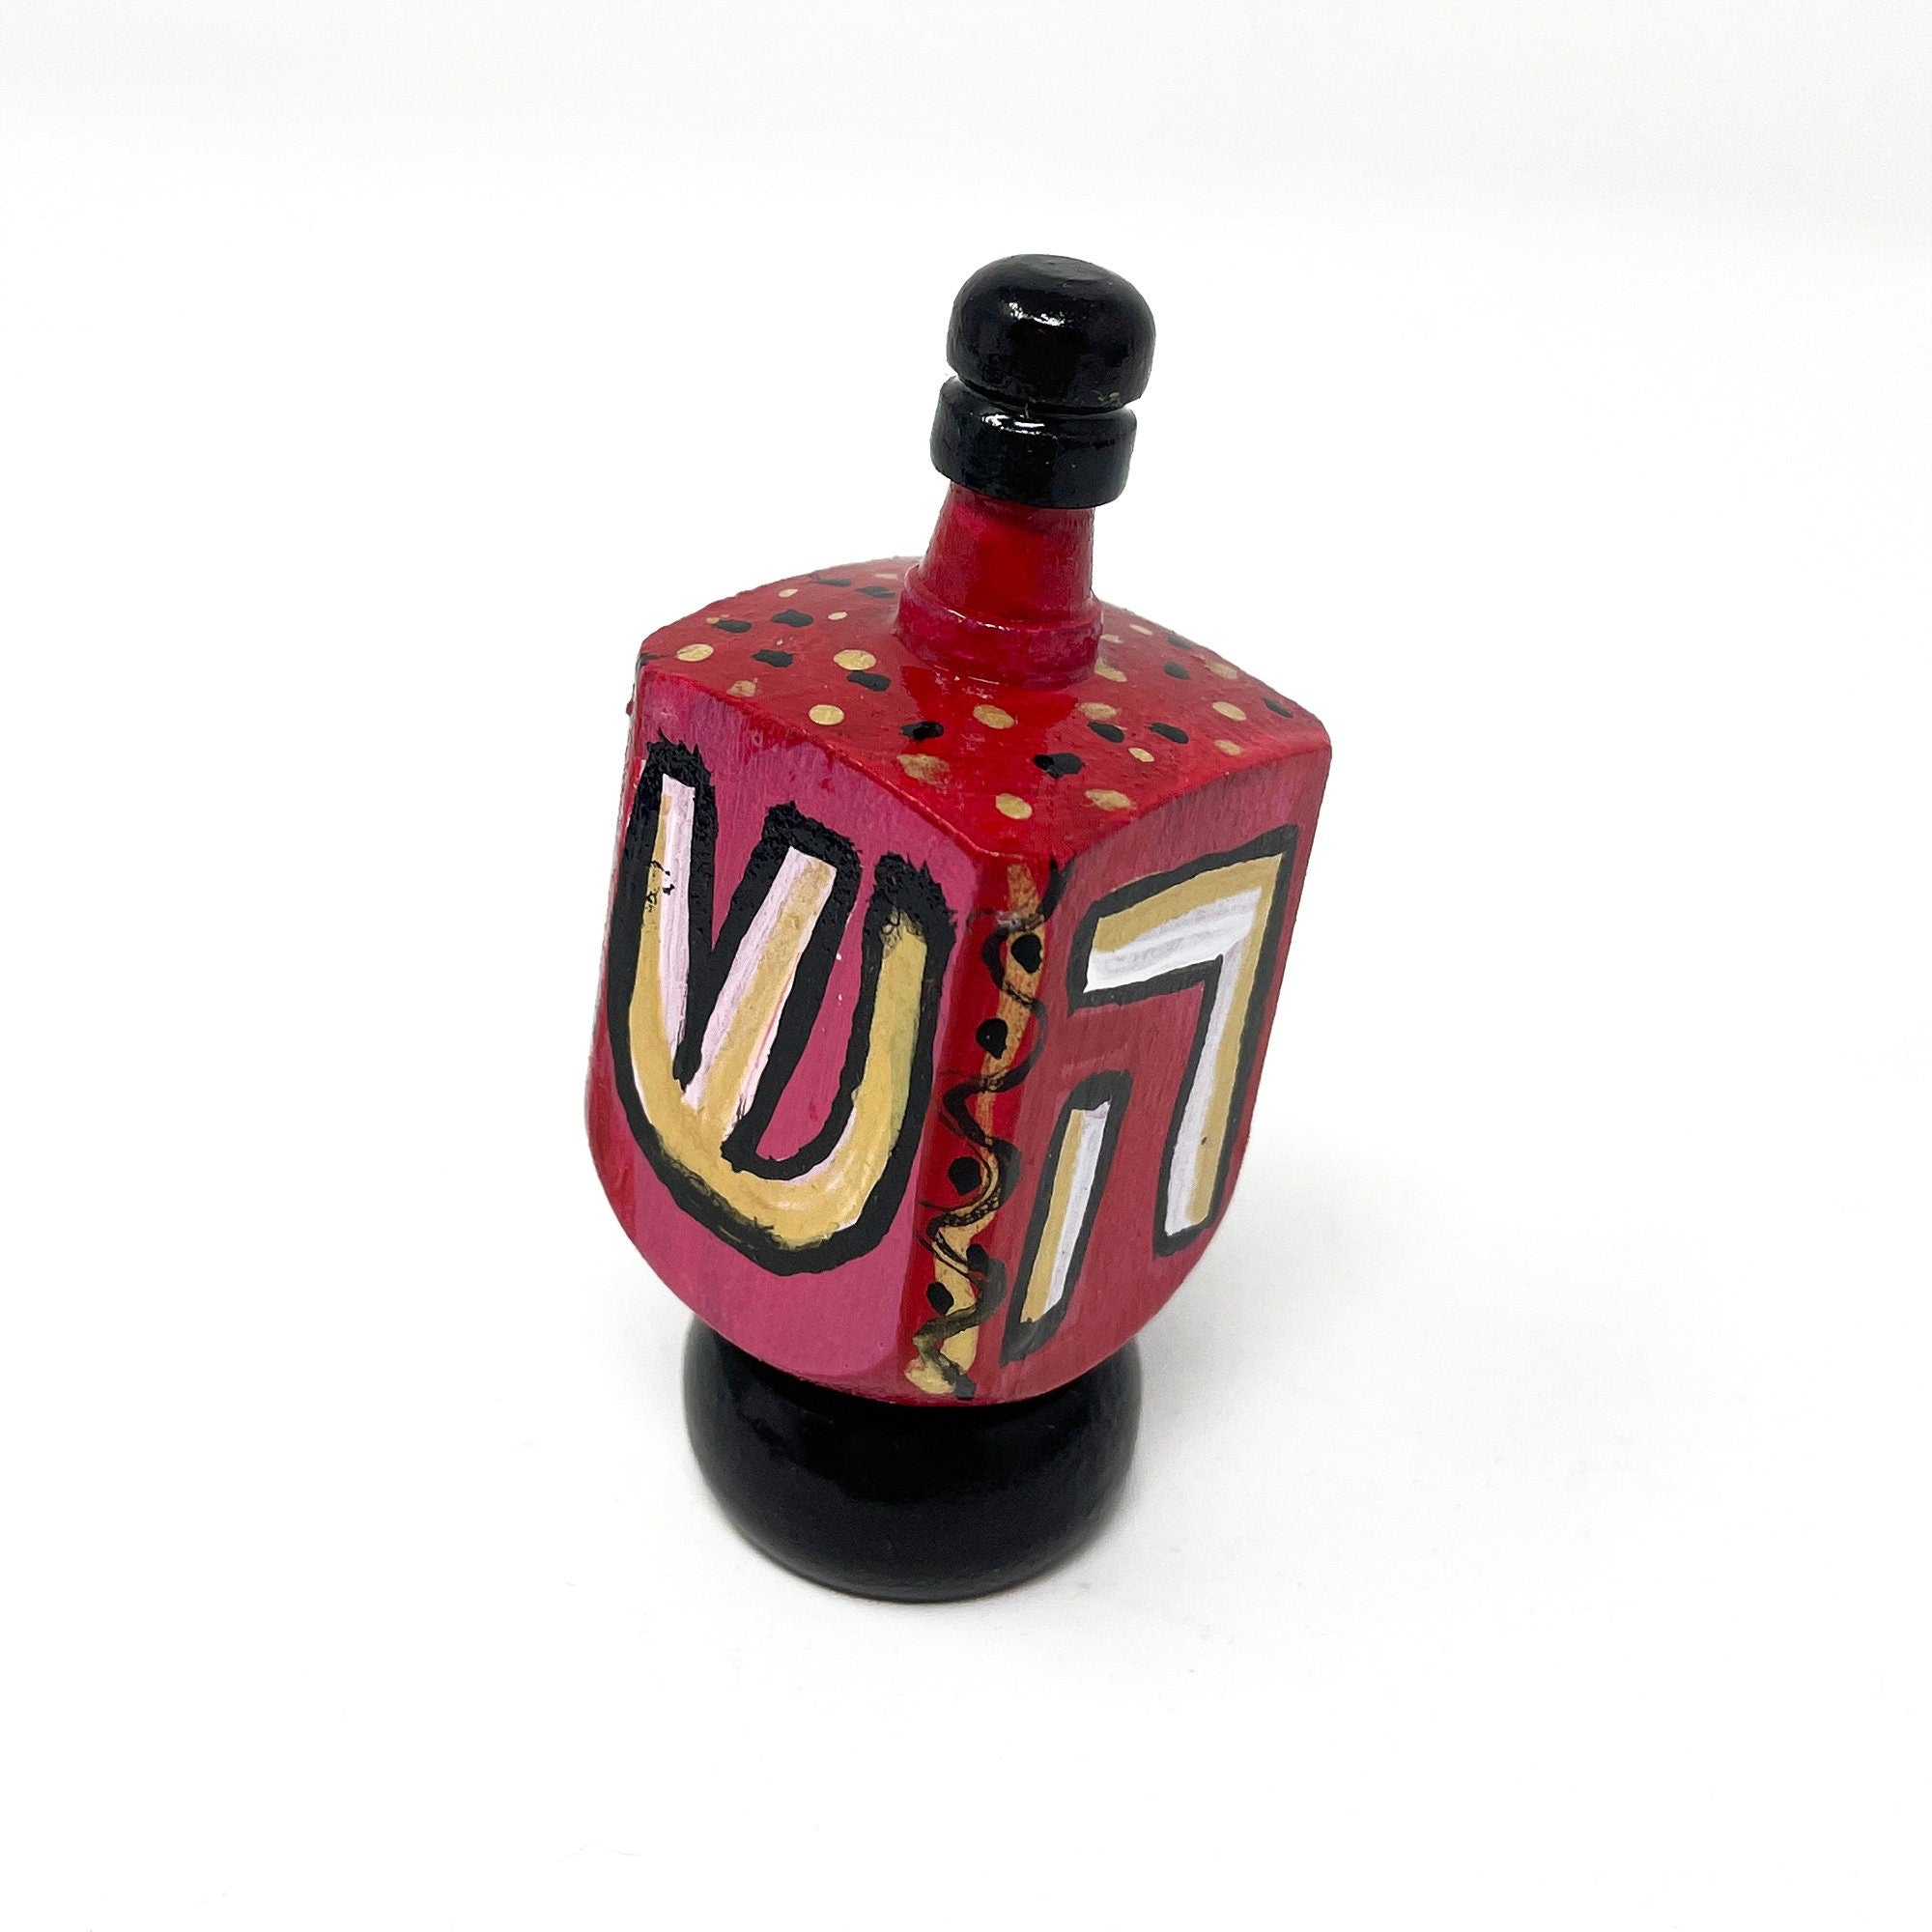 Red Dreidel with Gold Accents - Hand Painted Wooden Dreidel - Hanukkah Gift for Him or Her - Unique Judaica